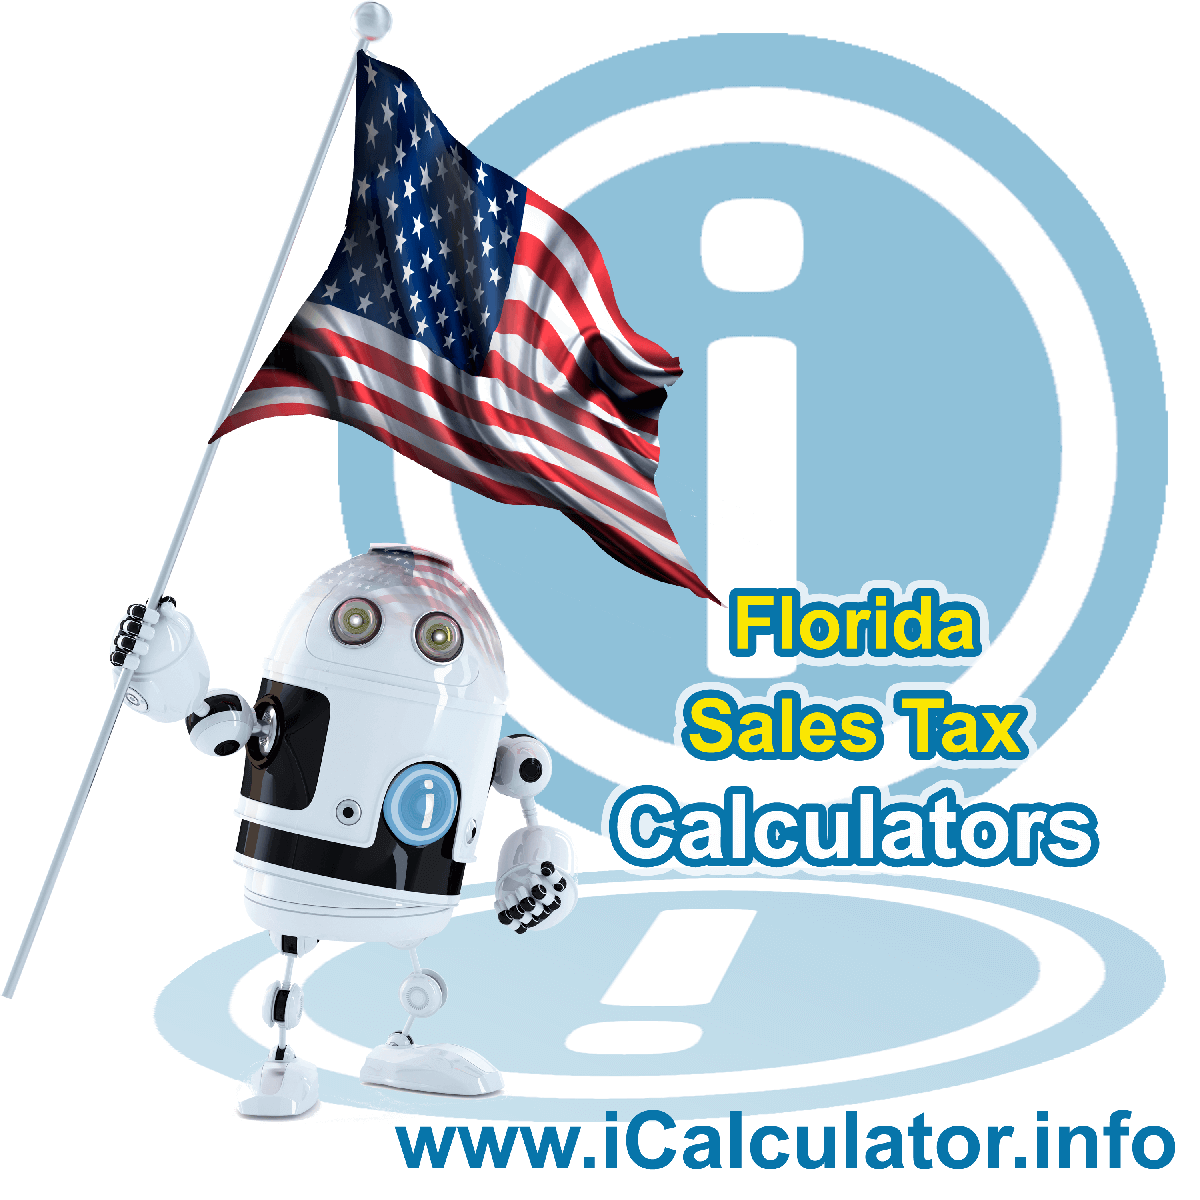 Charlotte County Sales Rates: This image illustrates a calculator robot calculating Charlotte County sales tax manually using the Charlotte County Sales Tax Formula. You can use this information to calculate Charlotte County Sales Tax manually or use the Charlotte County Sales Tax Calculator to calculate sales tax online.